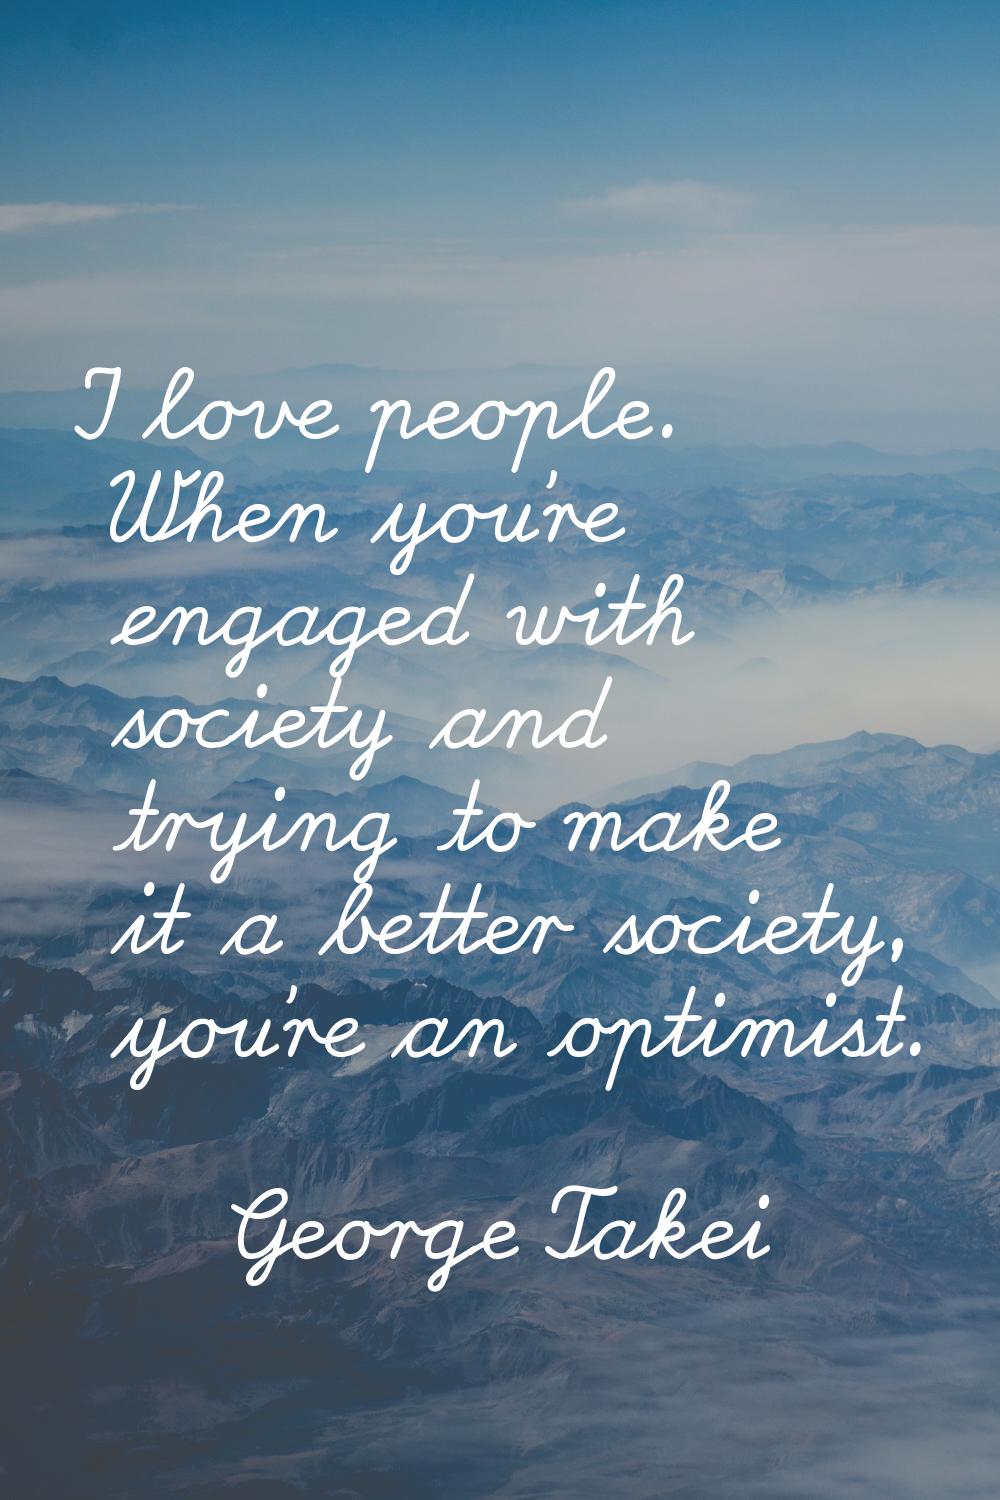 I love people. When you're engaged with society and trying to make it a better society, you're an o